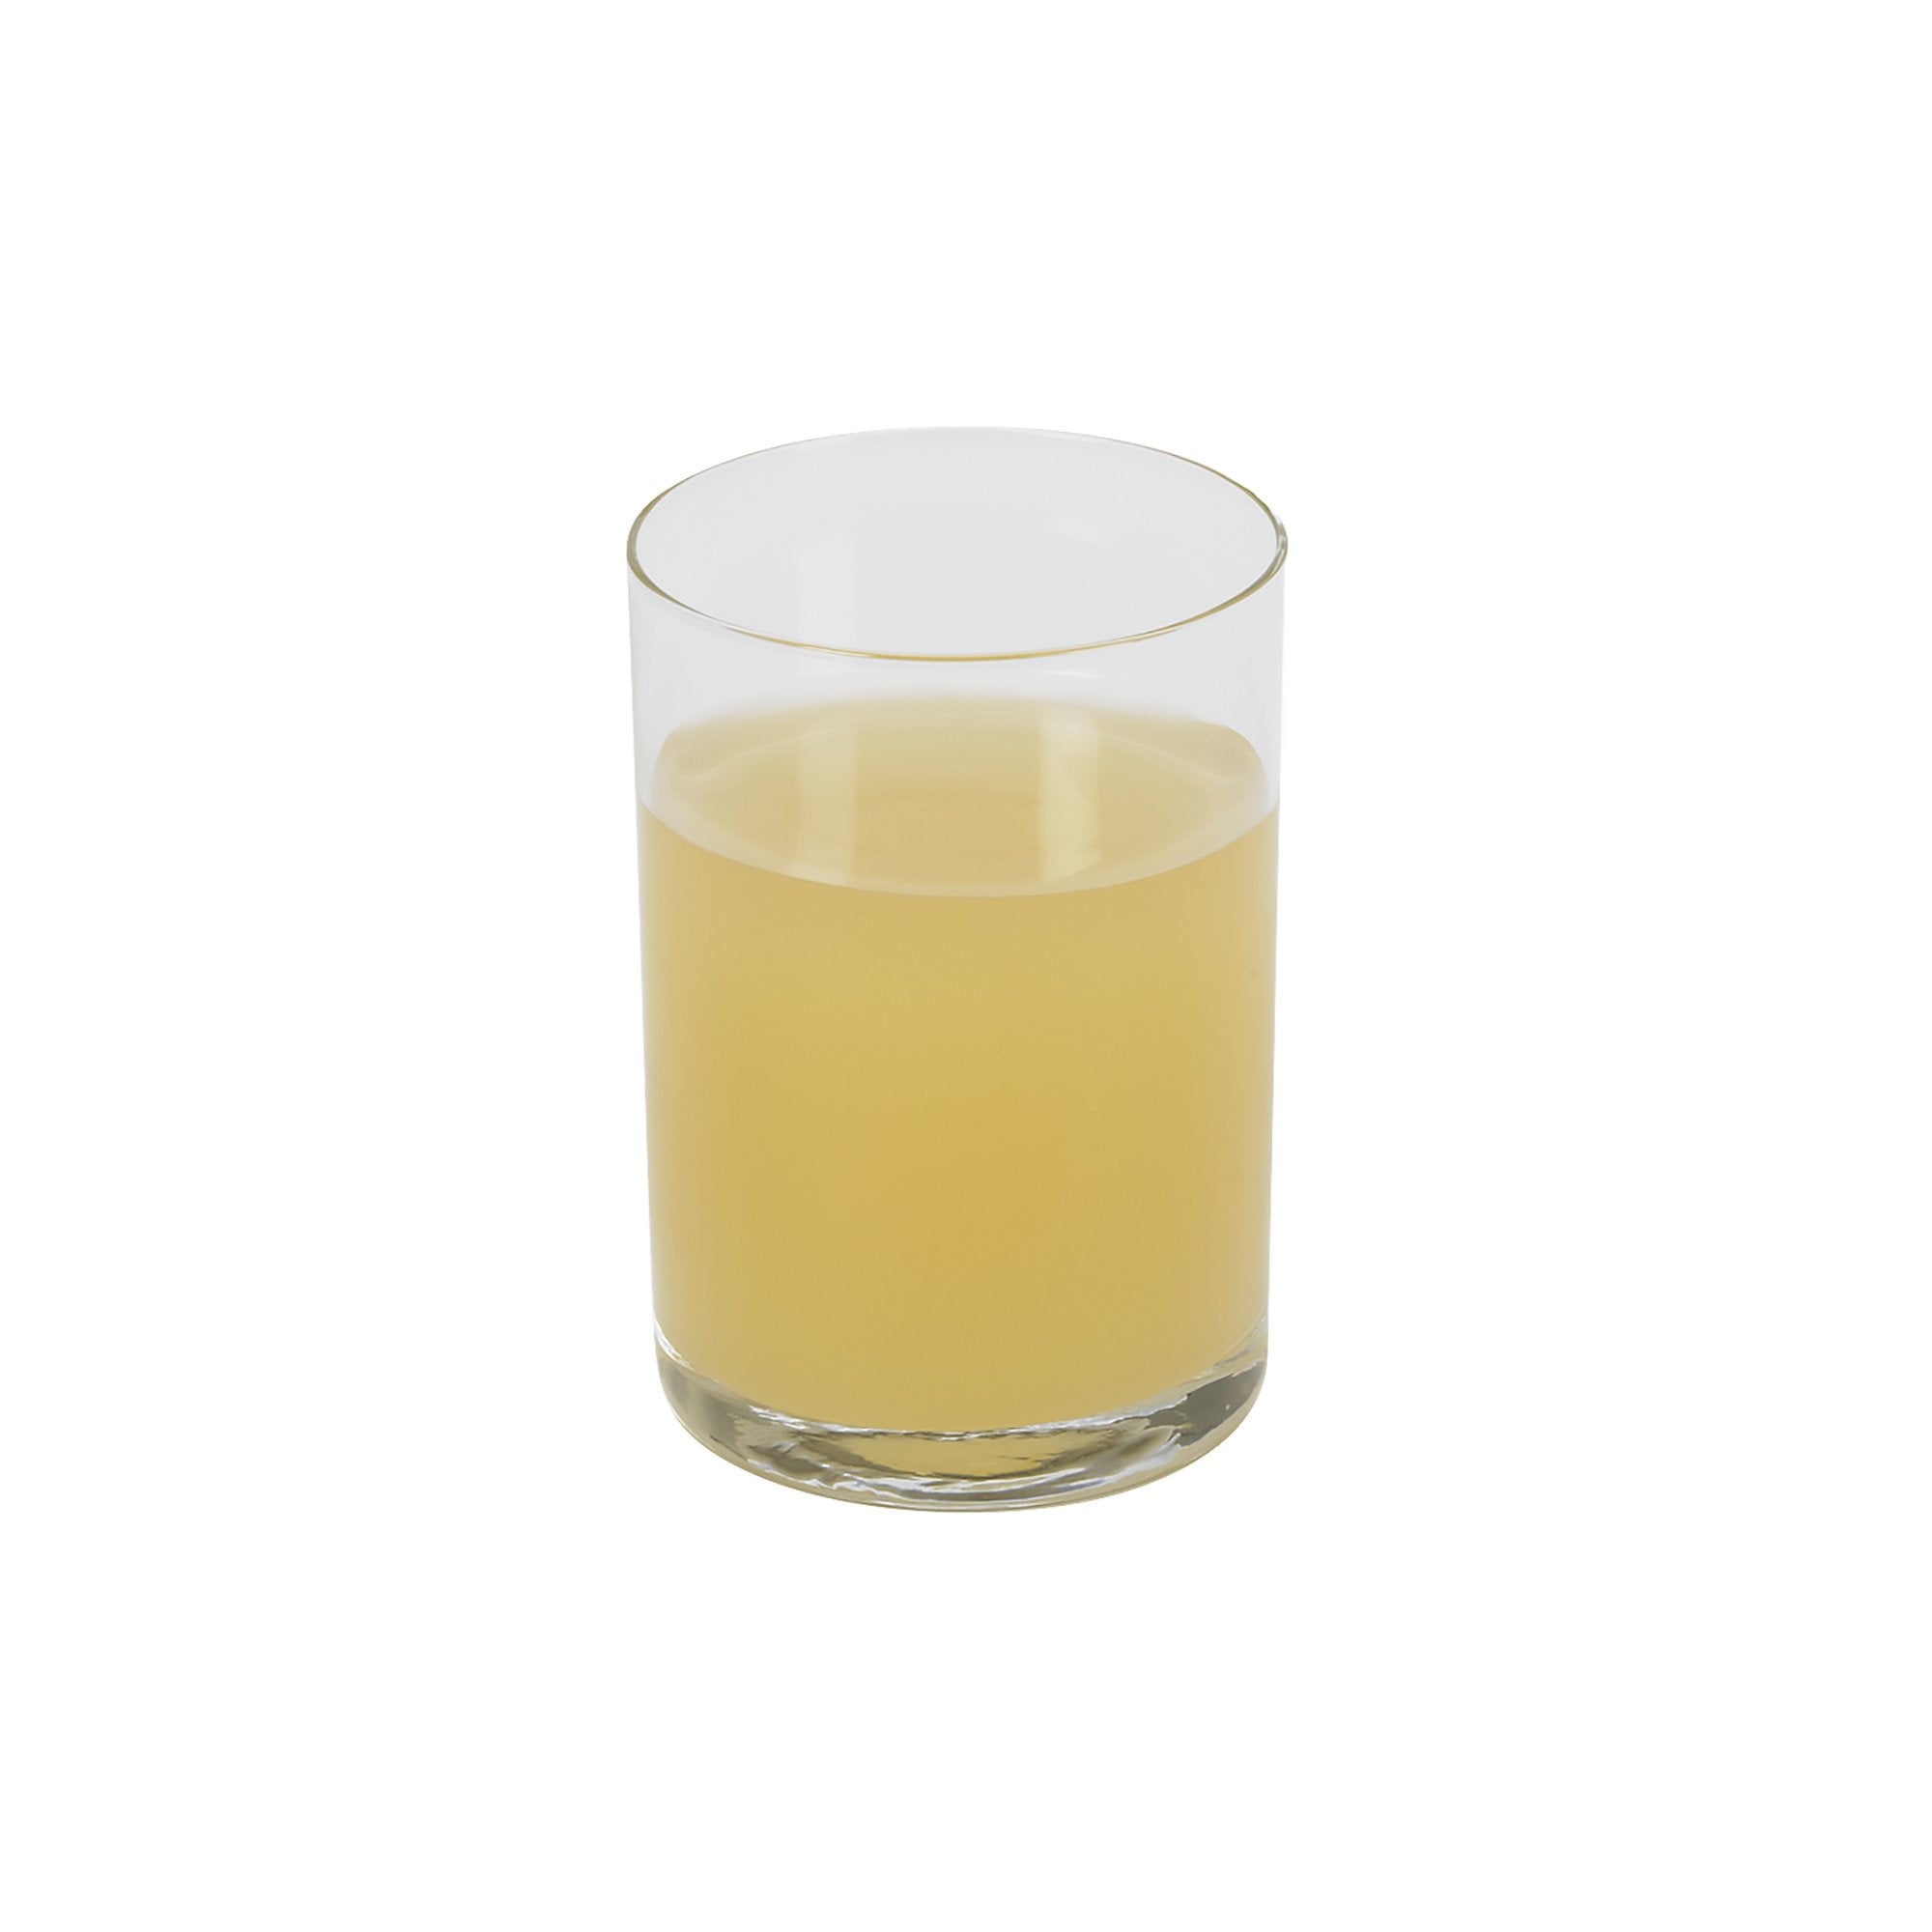 Thickened Beverage Thick & Easy 4 oz. Portion Cup Apple Flavor Liquid IDDSI Level 3 Moderately Thick/Liquidized